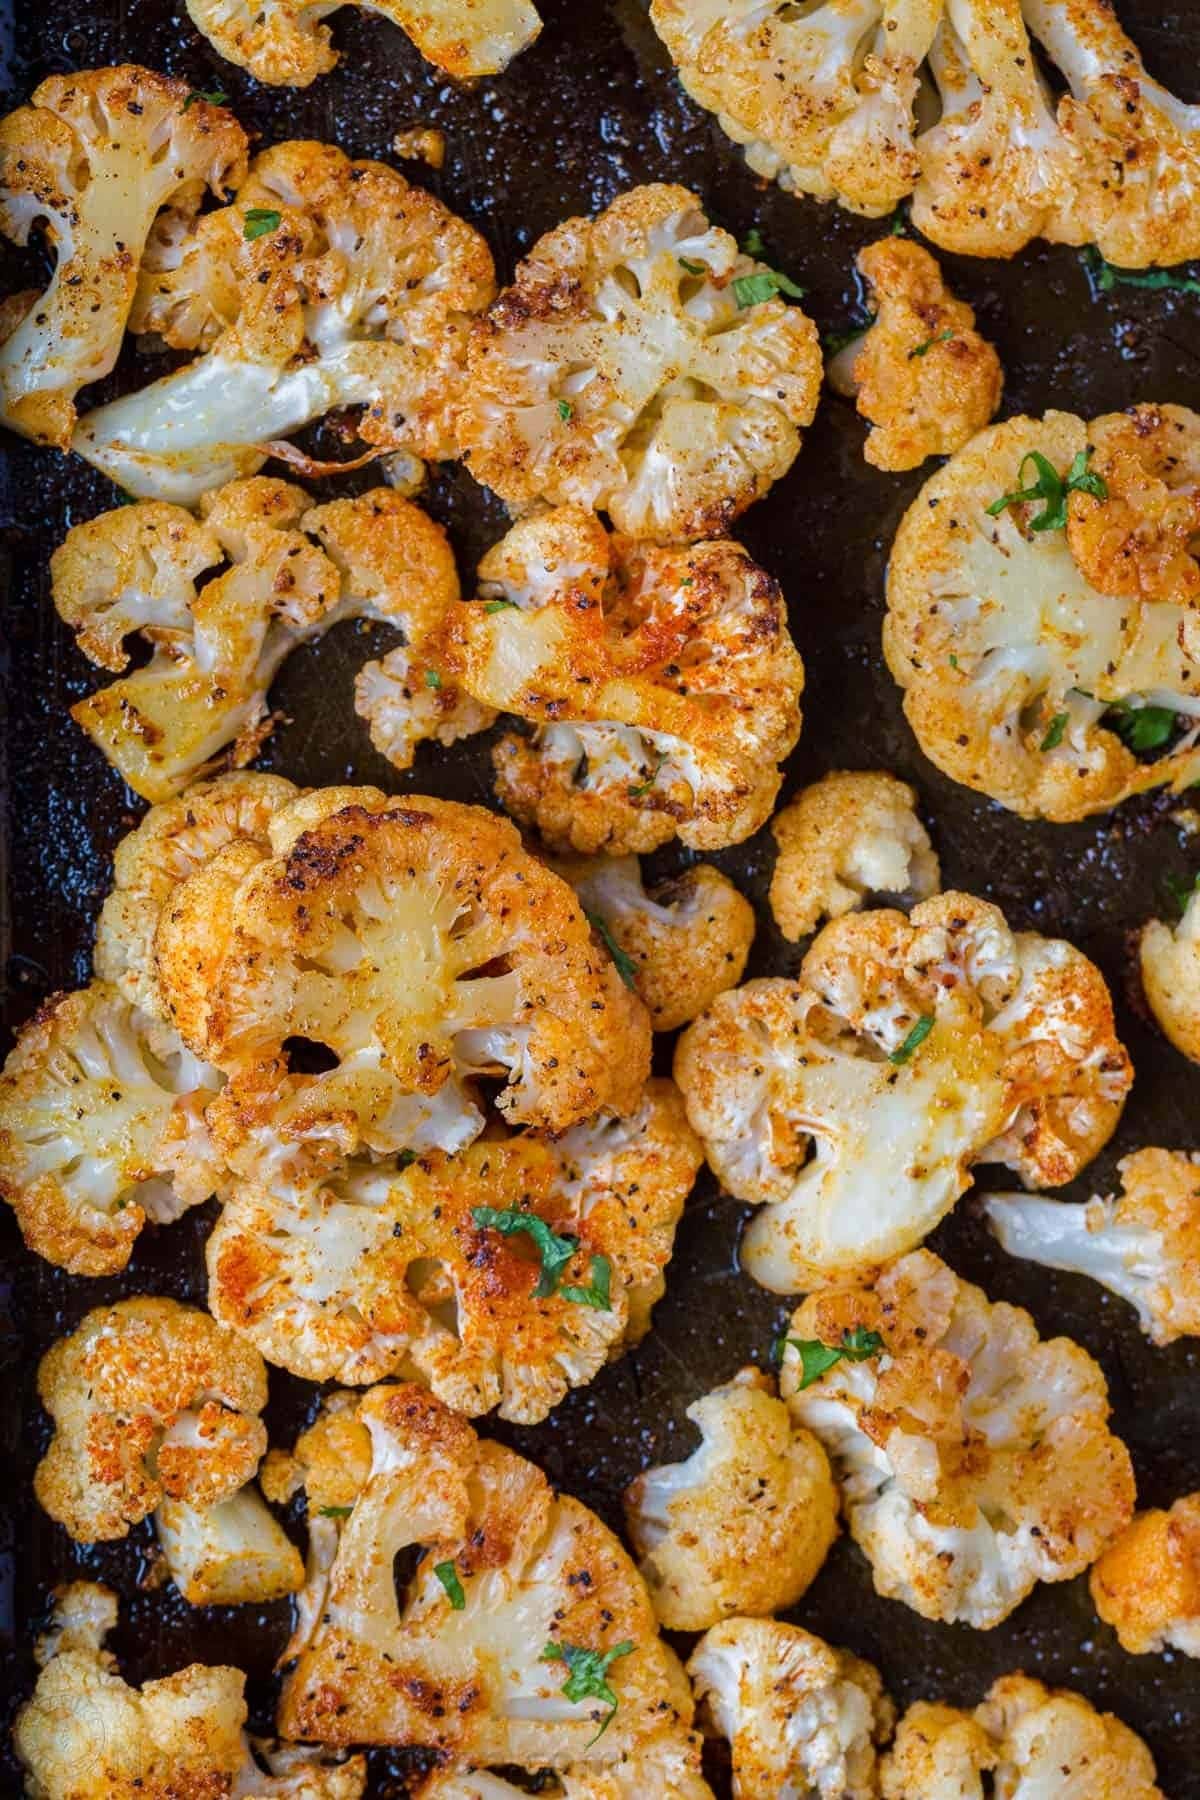 Roasted cauliflower tossed in a cast iron pan.